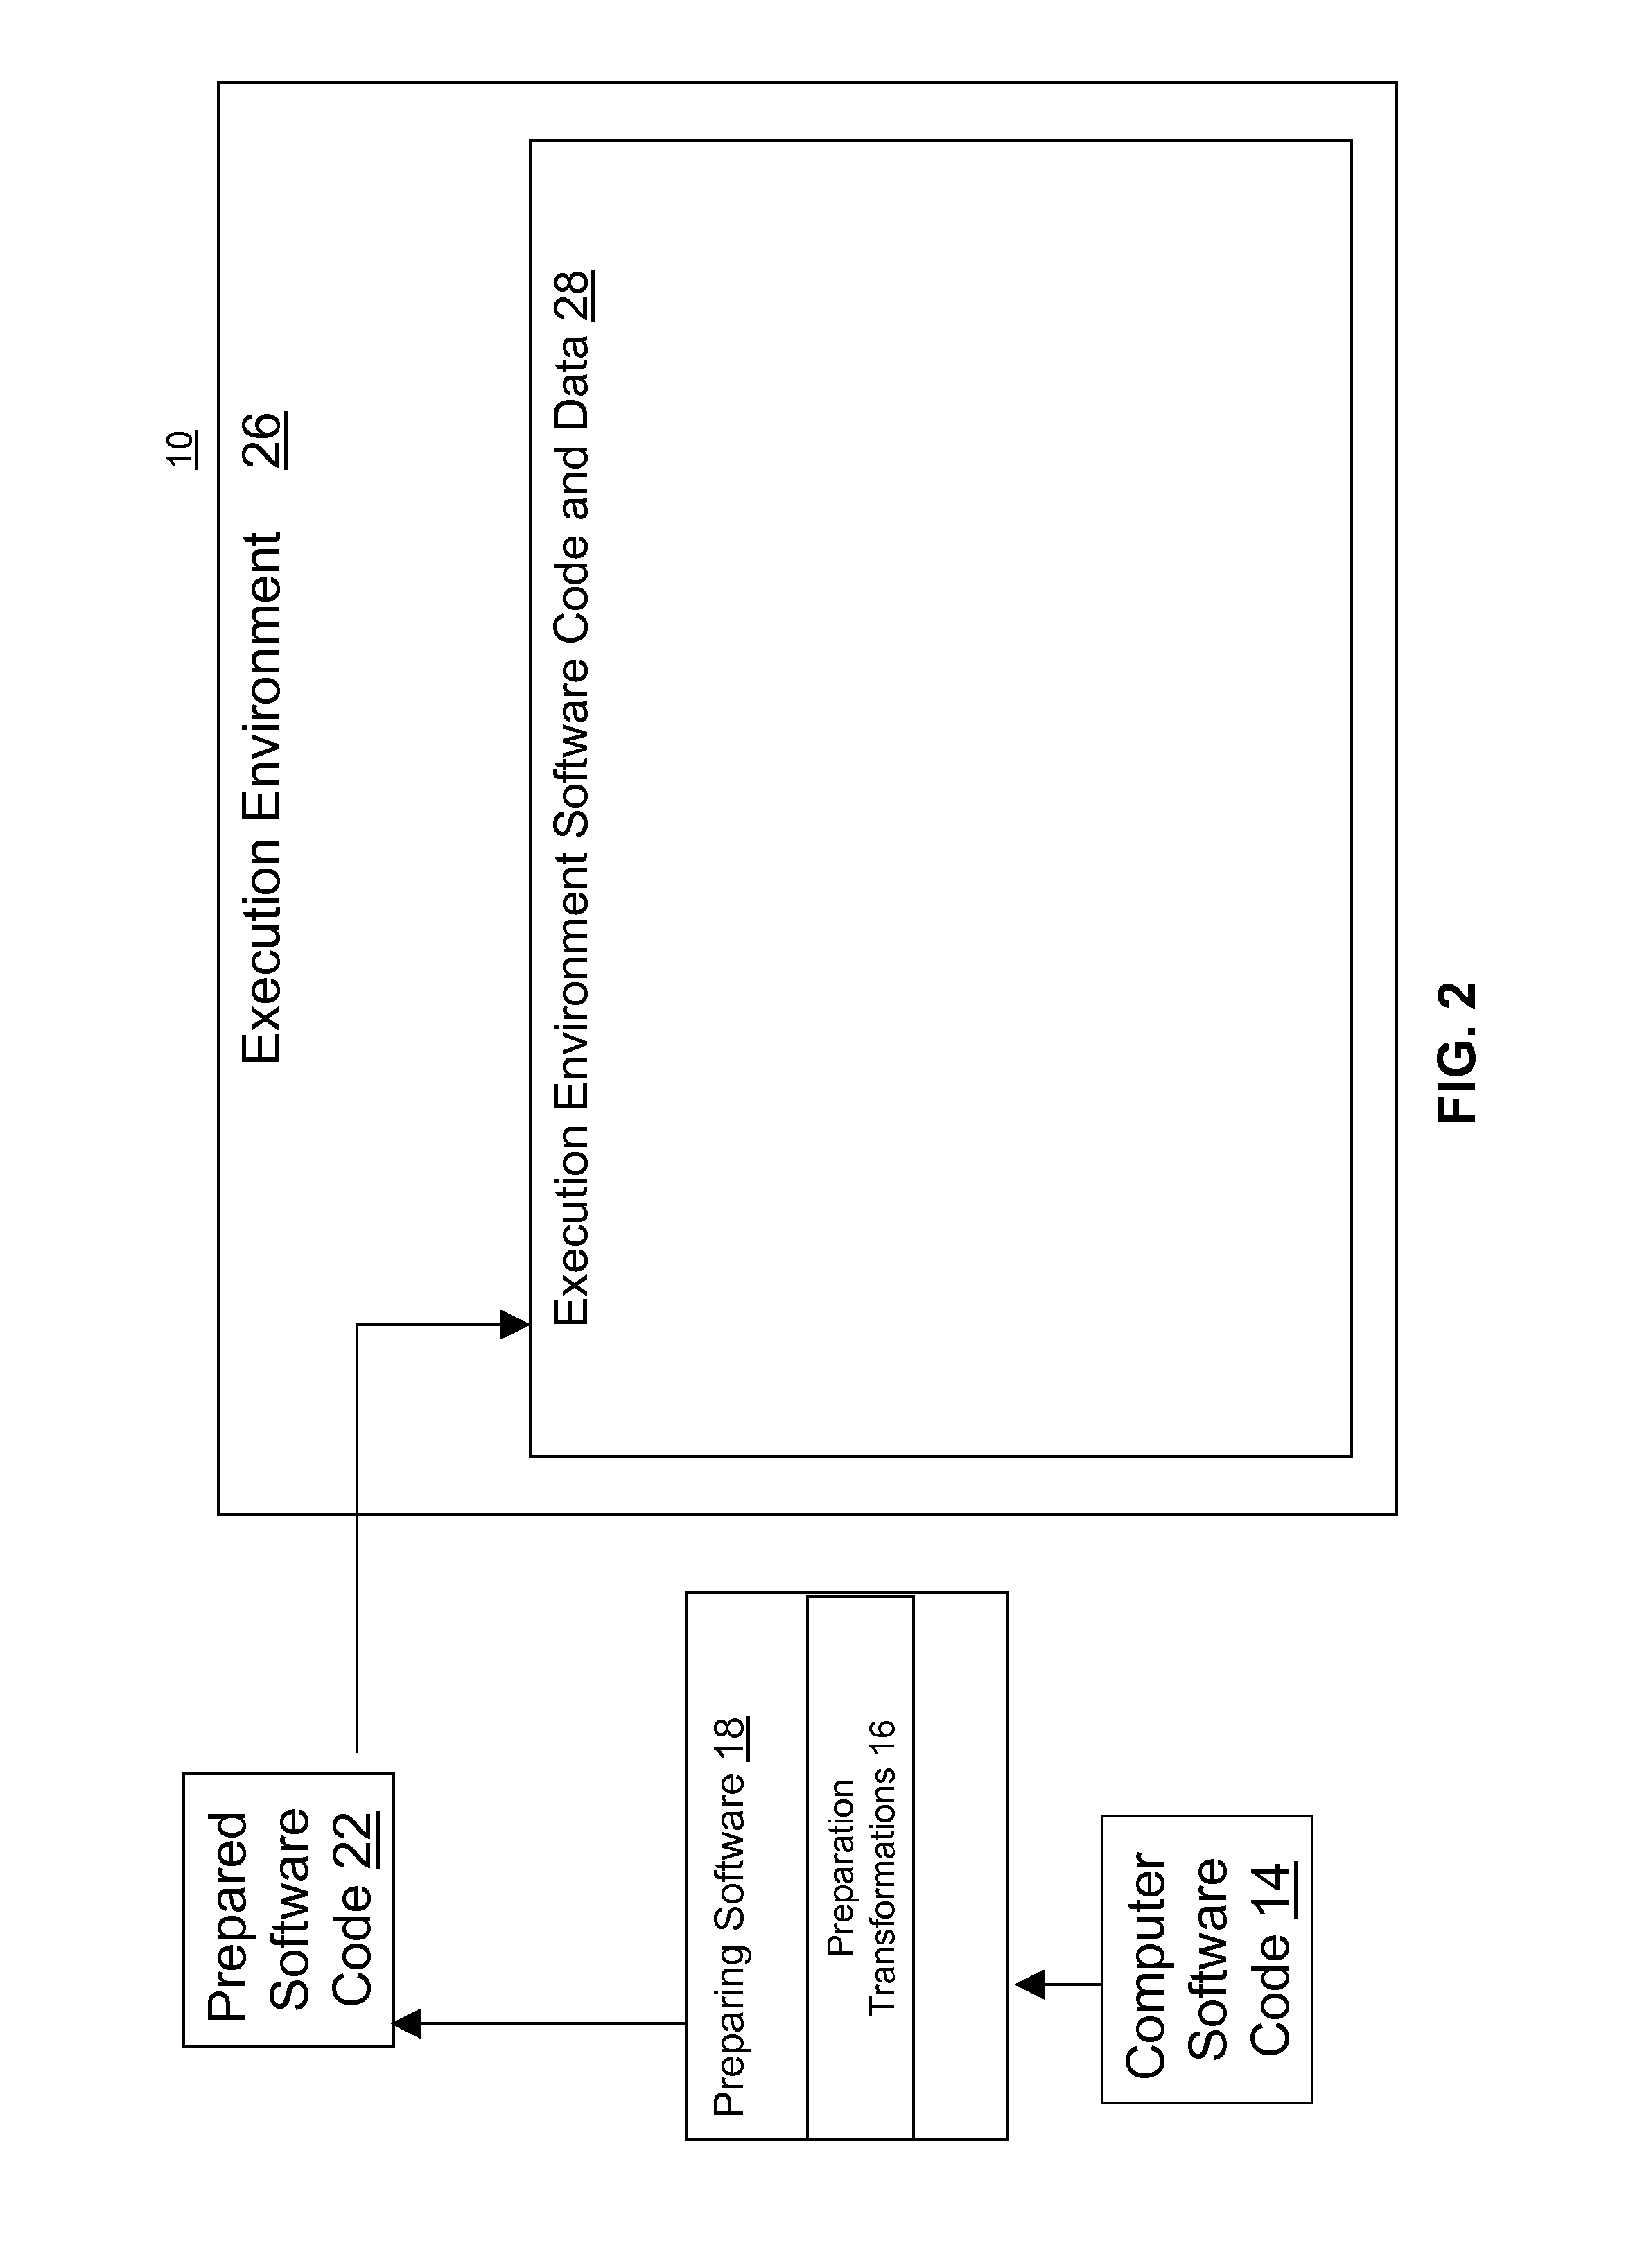 System, method and computer program product for protecting software via continuous anti-tampering and obfuscation transforms